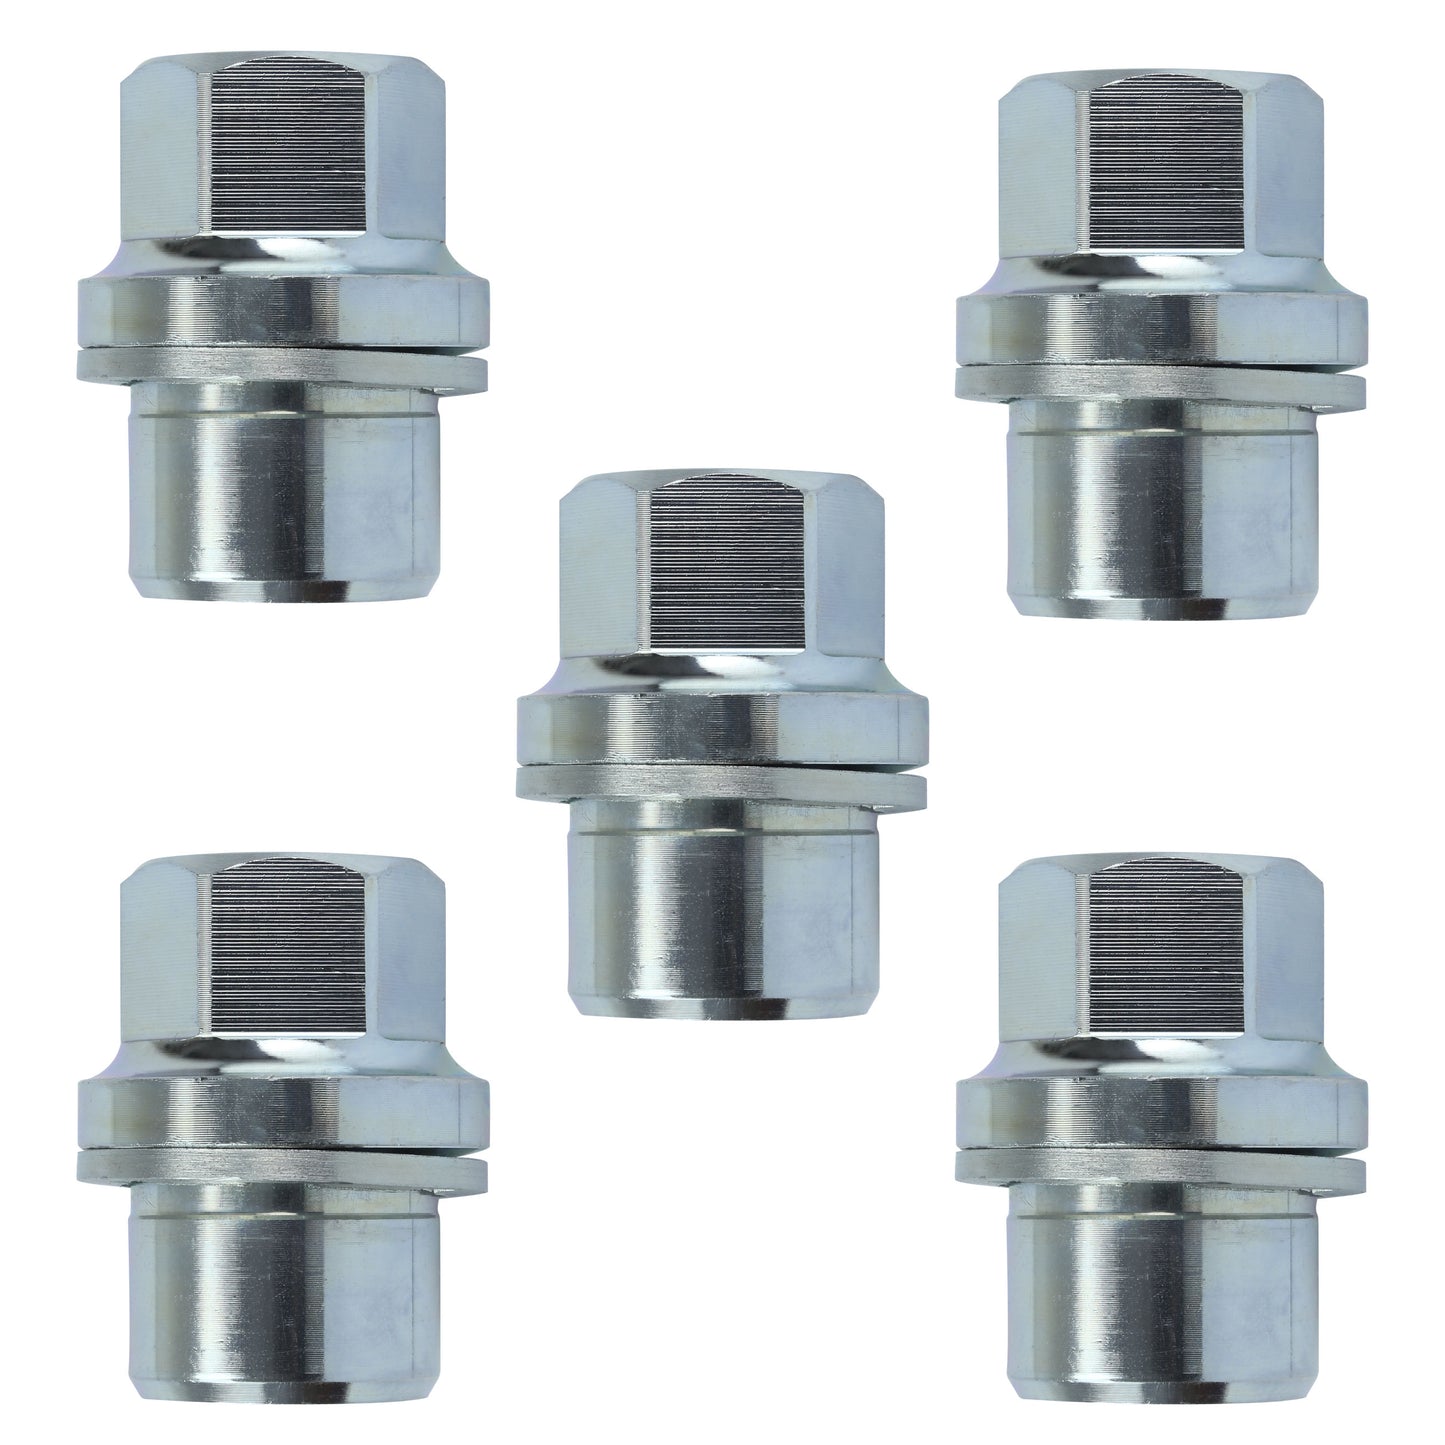 Silver Alloy Wheel Nuts 5pc kit for Range Rover Classic - Alloy wheel type